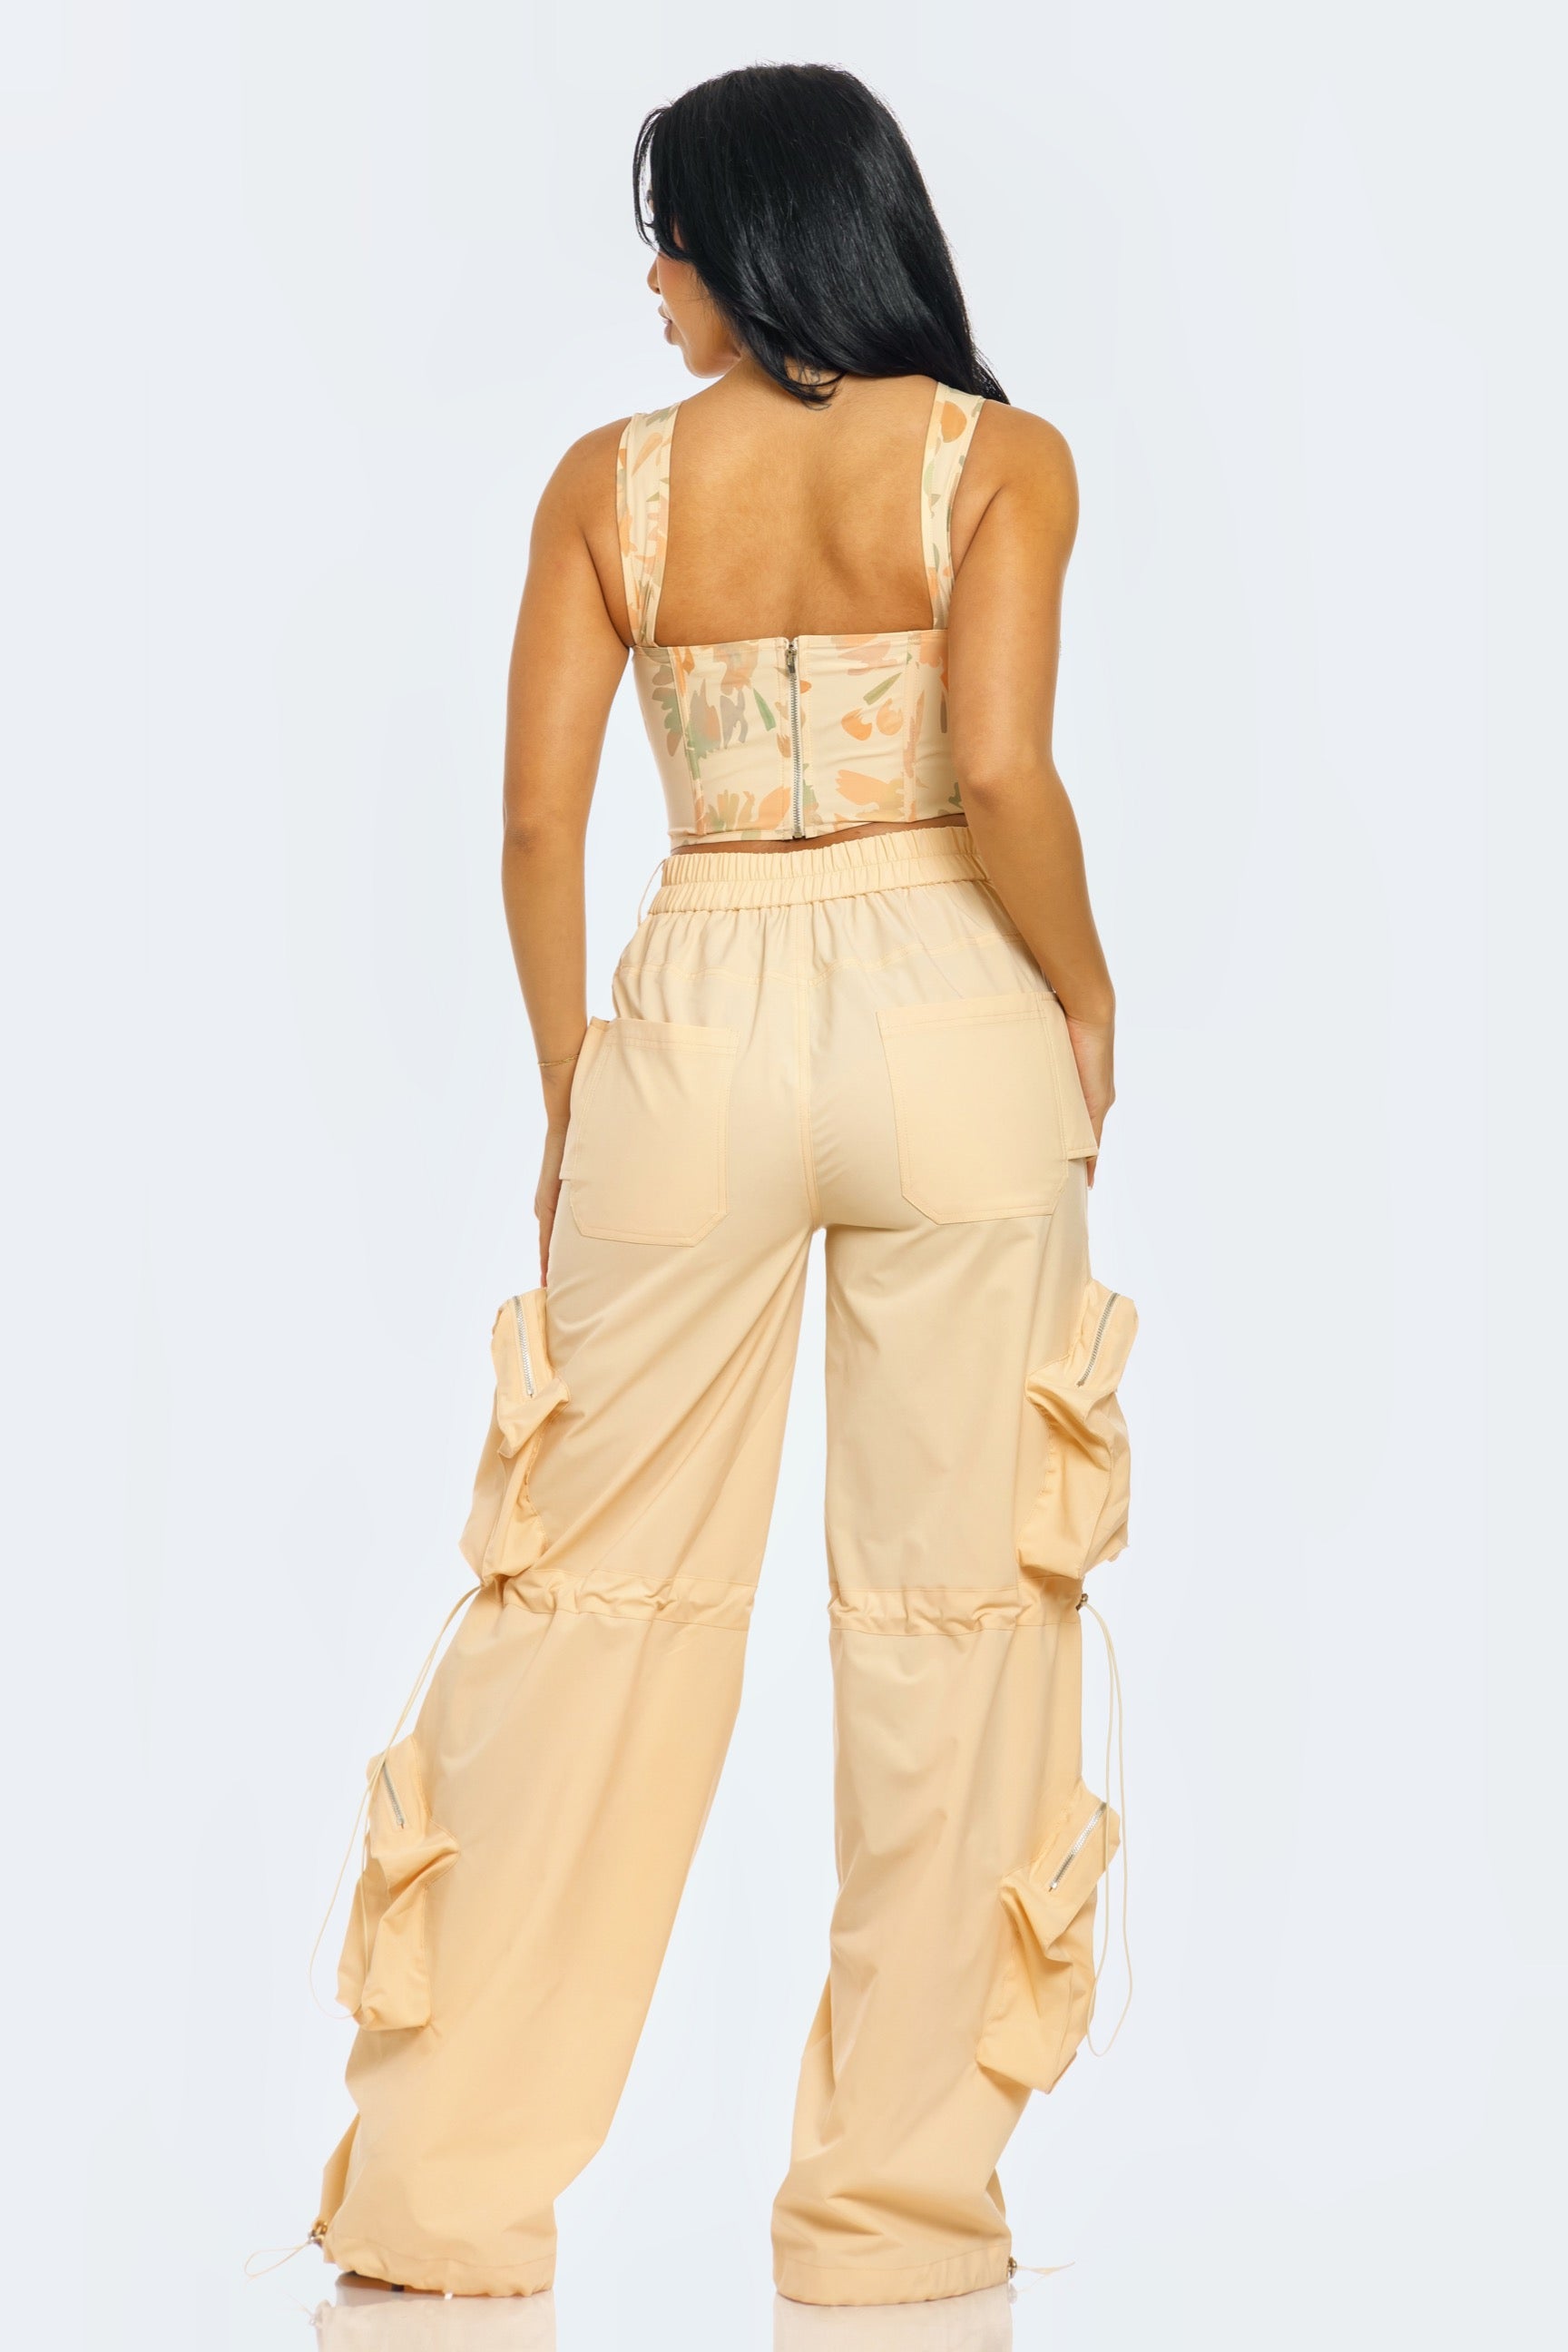 Keep up with me bloom corset top and cargo pants